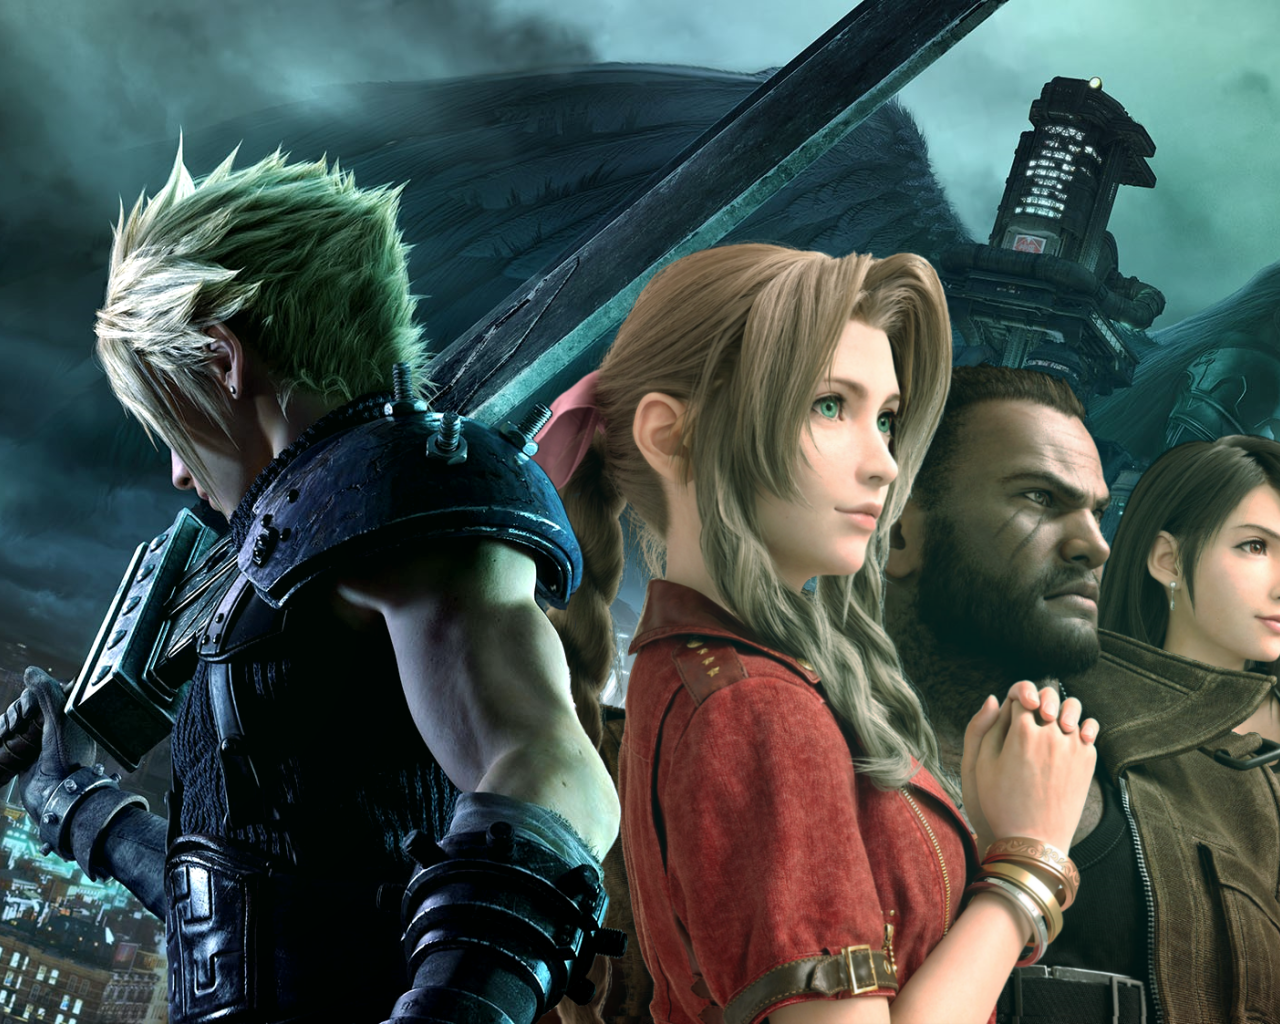 Characters of the computer game Final Fantasy VII Remake, 2020